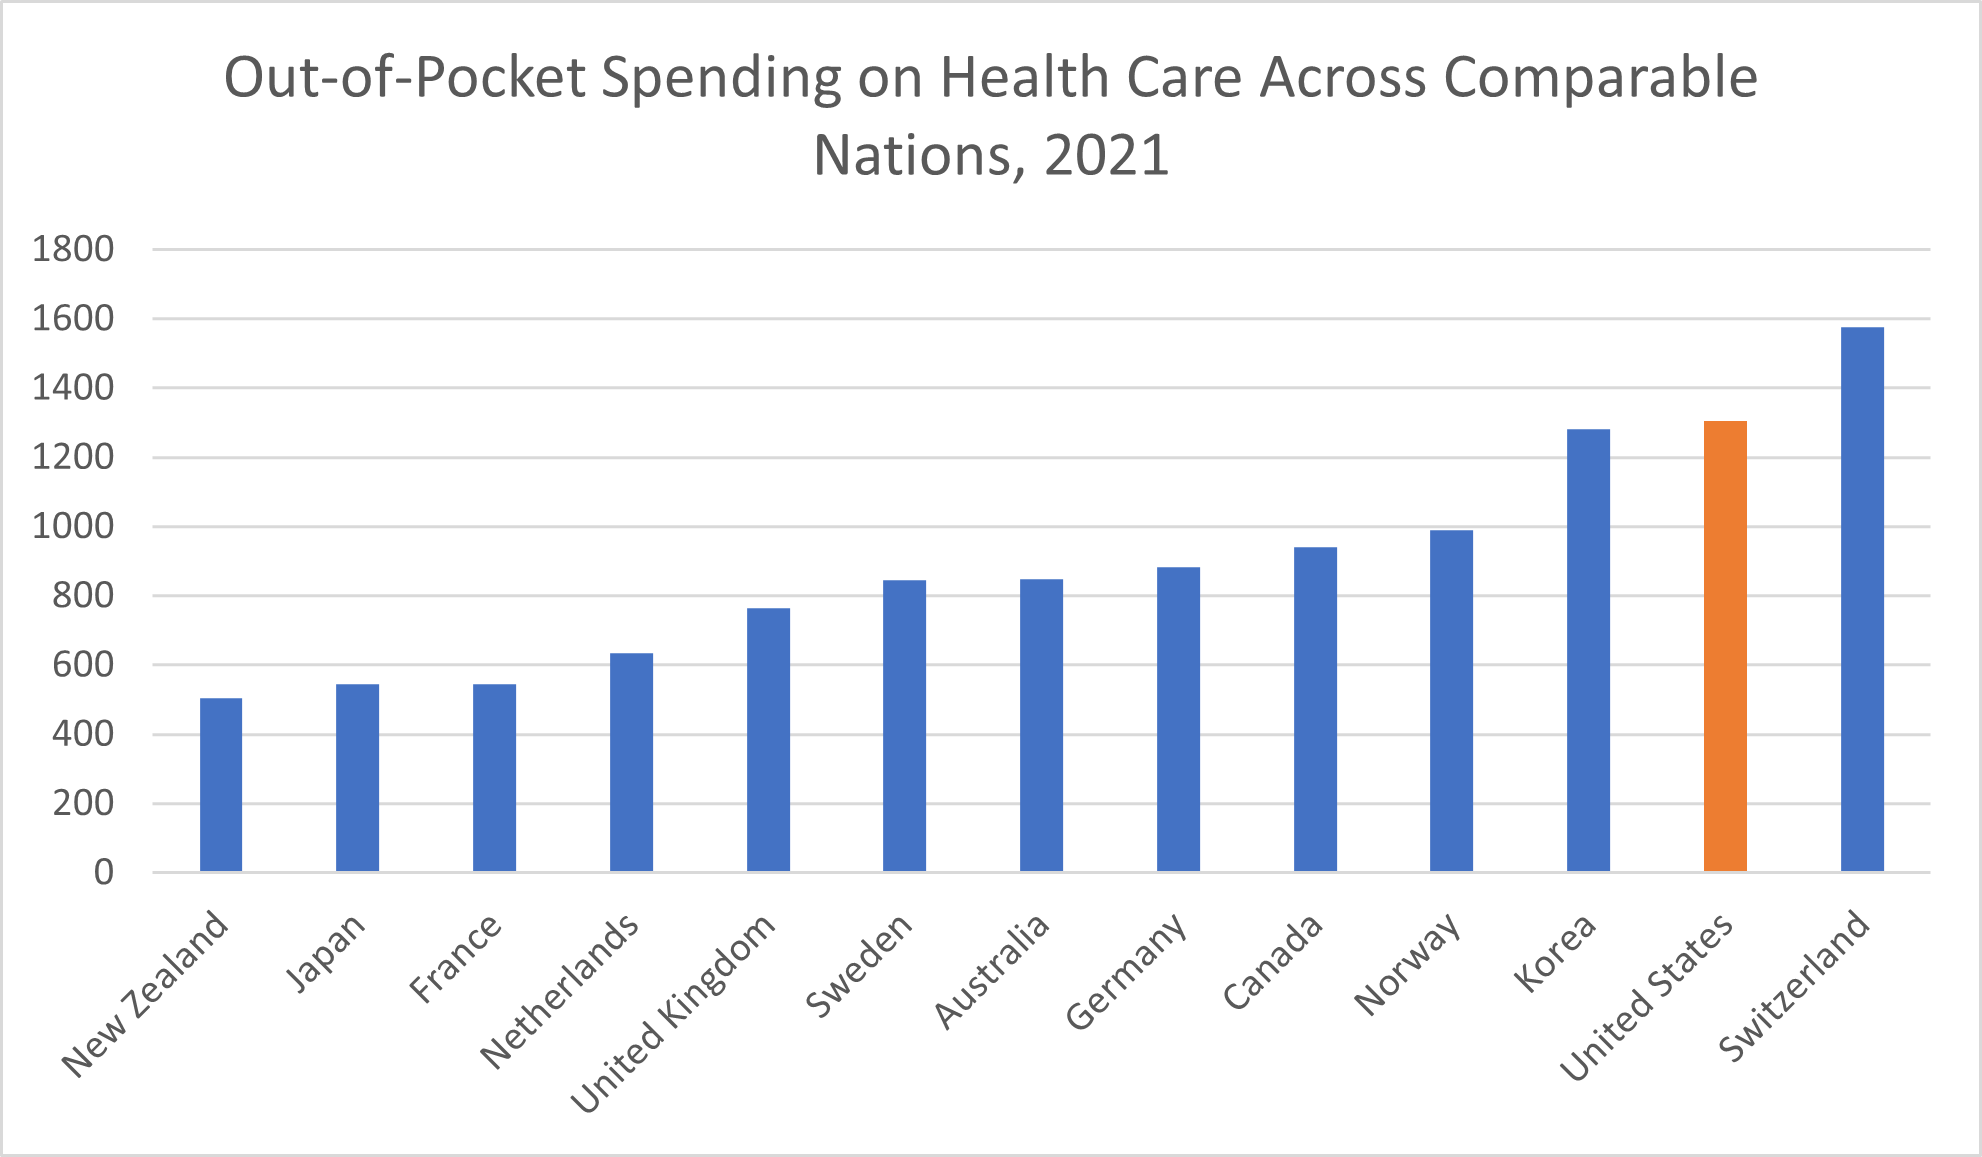 Out-of-pocket spending on health care across comparable nations, 2021